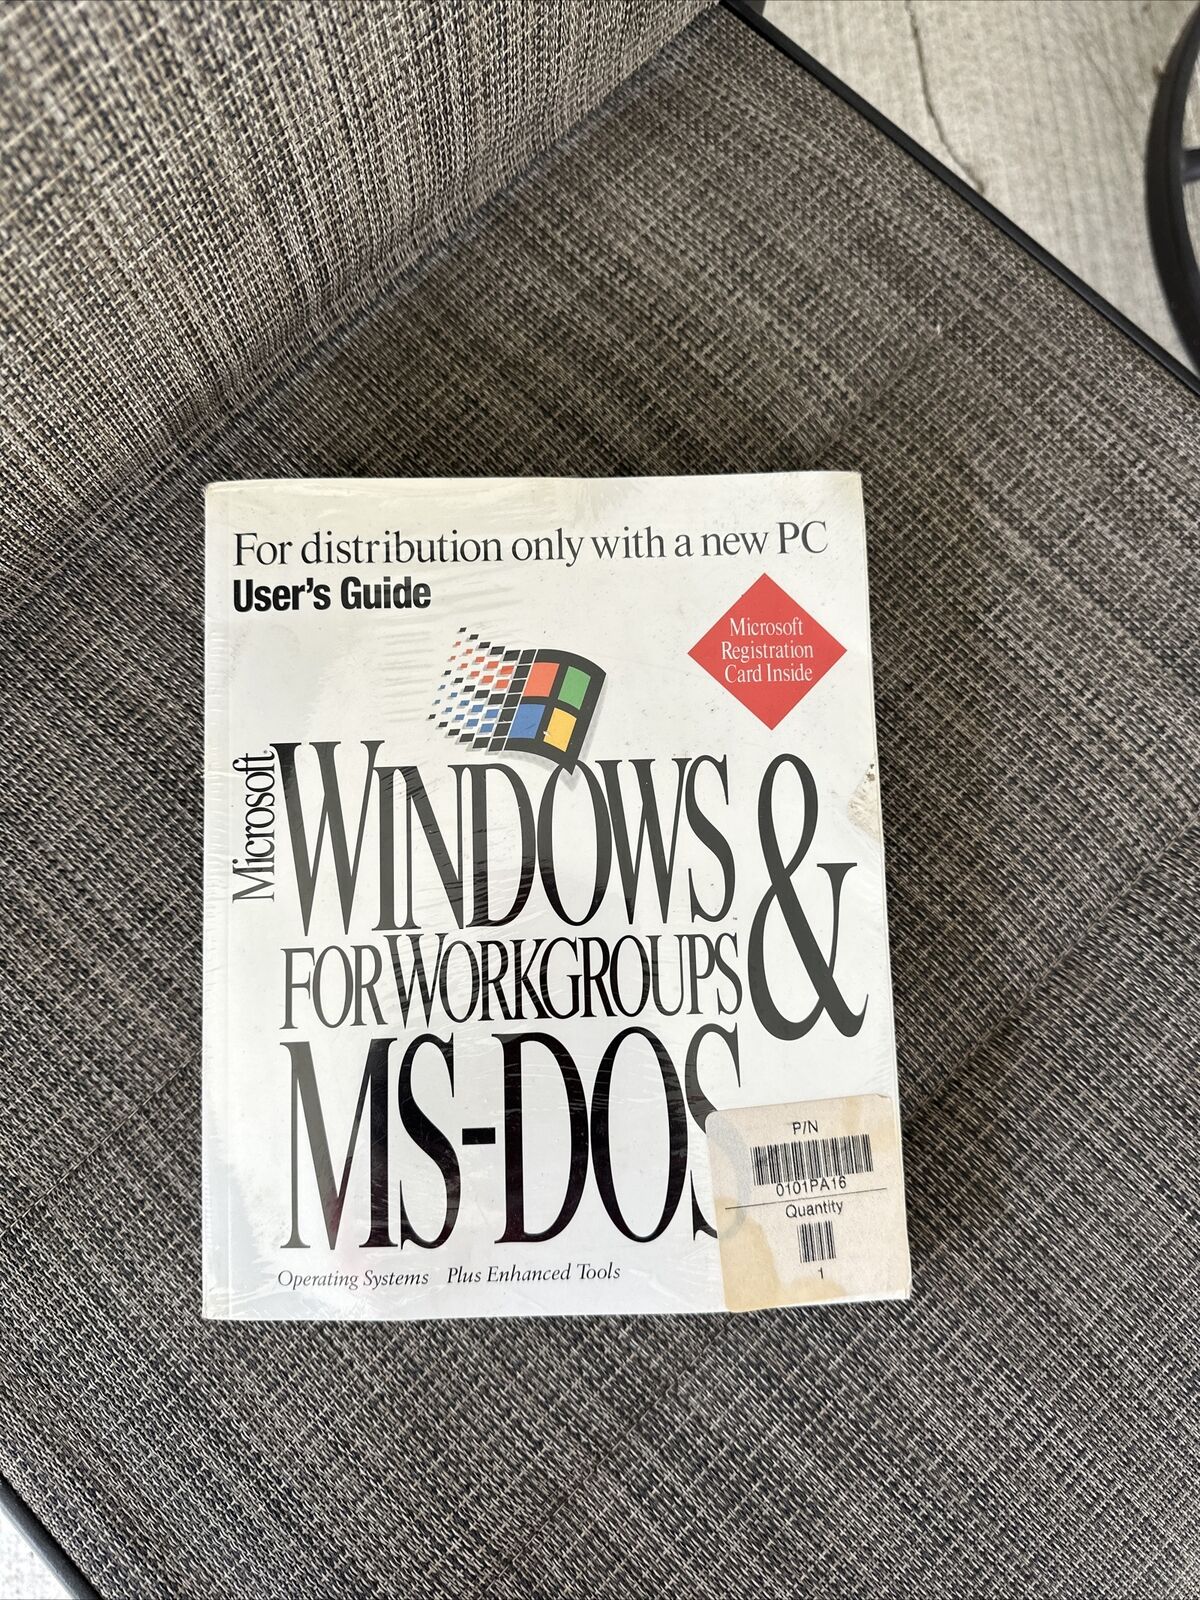 Microsoft Windows For Workgroups & MS-DOS Sealed 3.5 floppy - Brand new copy